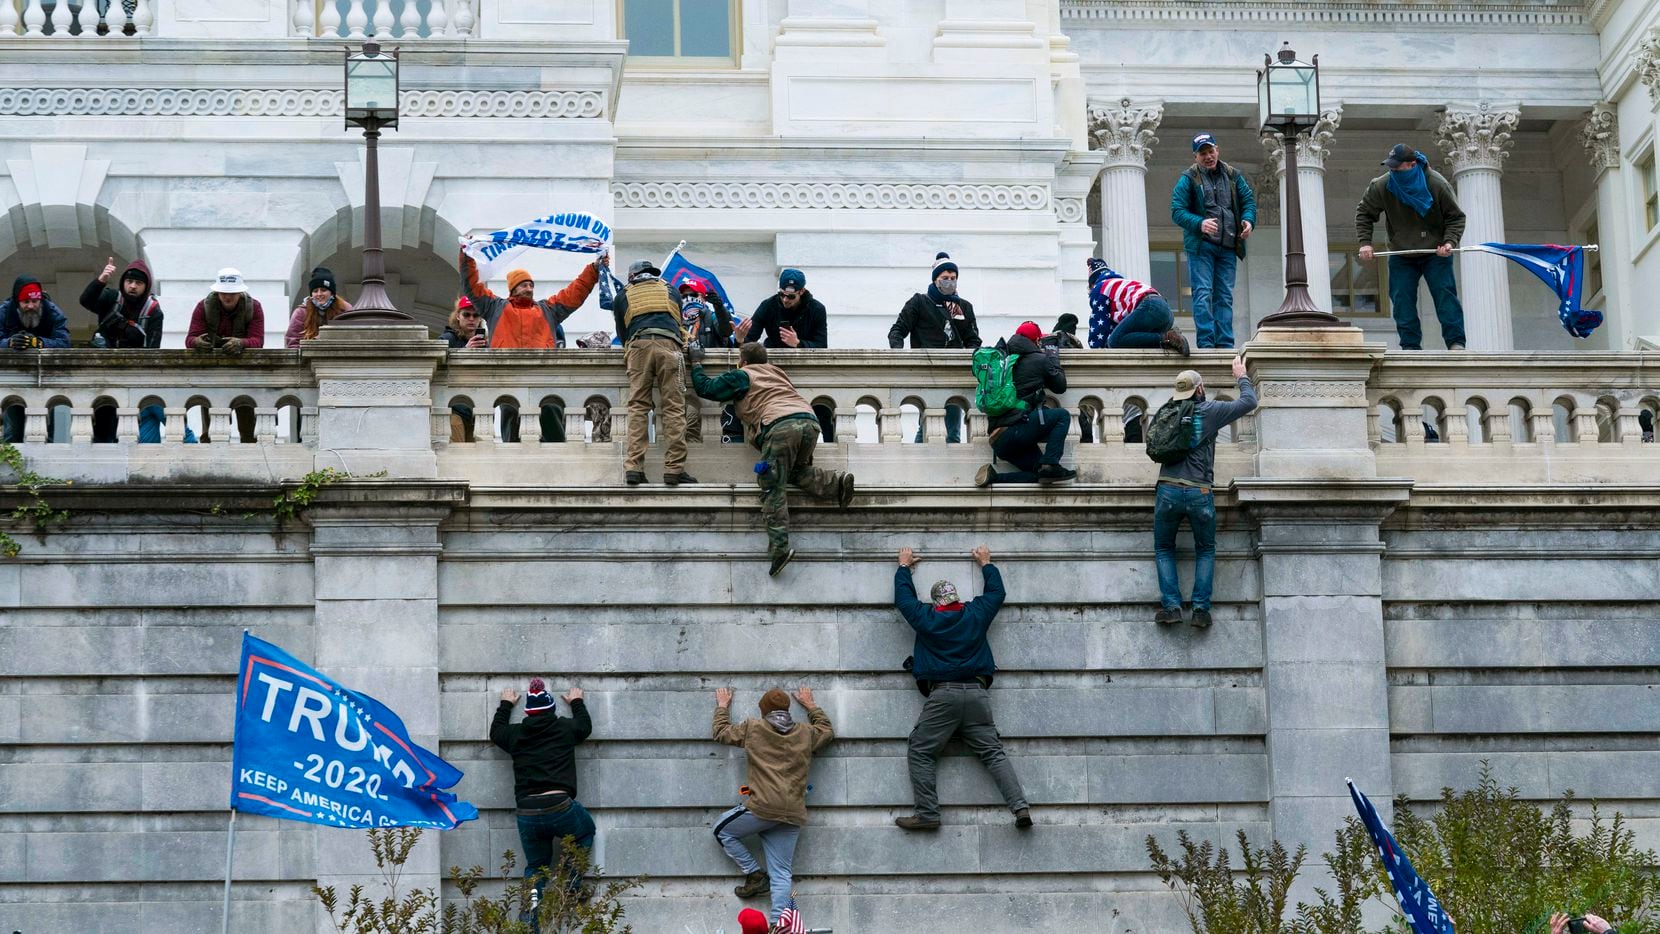 Supporters of President Donald Trump climb the west wall of the the U.S. Capitol in Washington as they try to storm the building on Jan. 6, 2021, while inside Congress prepared to affirm President-elect Joe Biden's election victory.